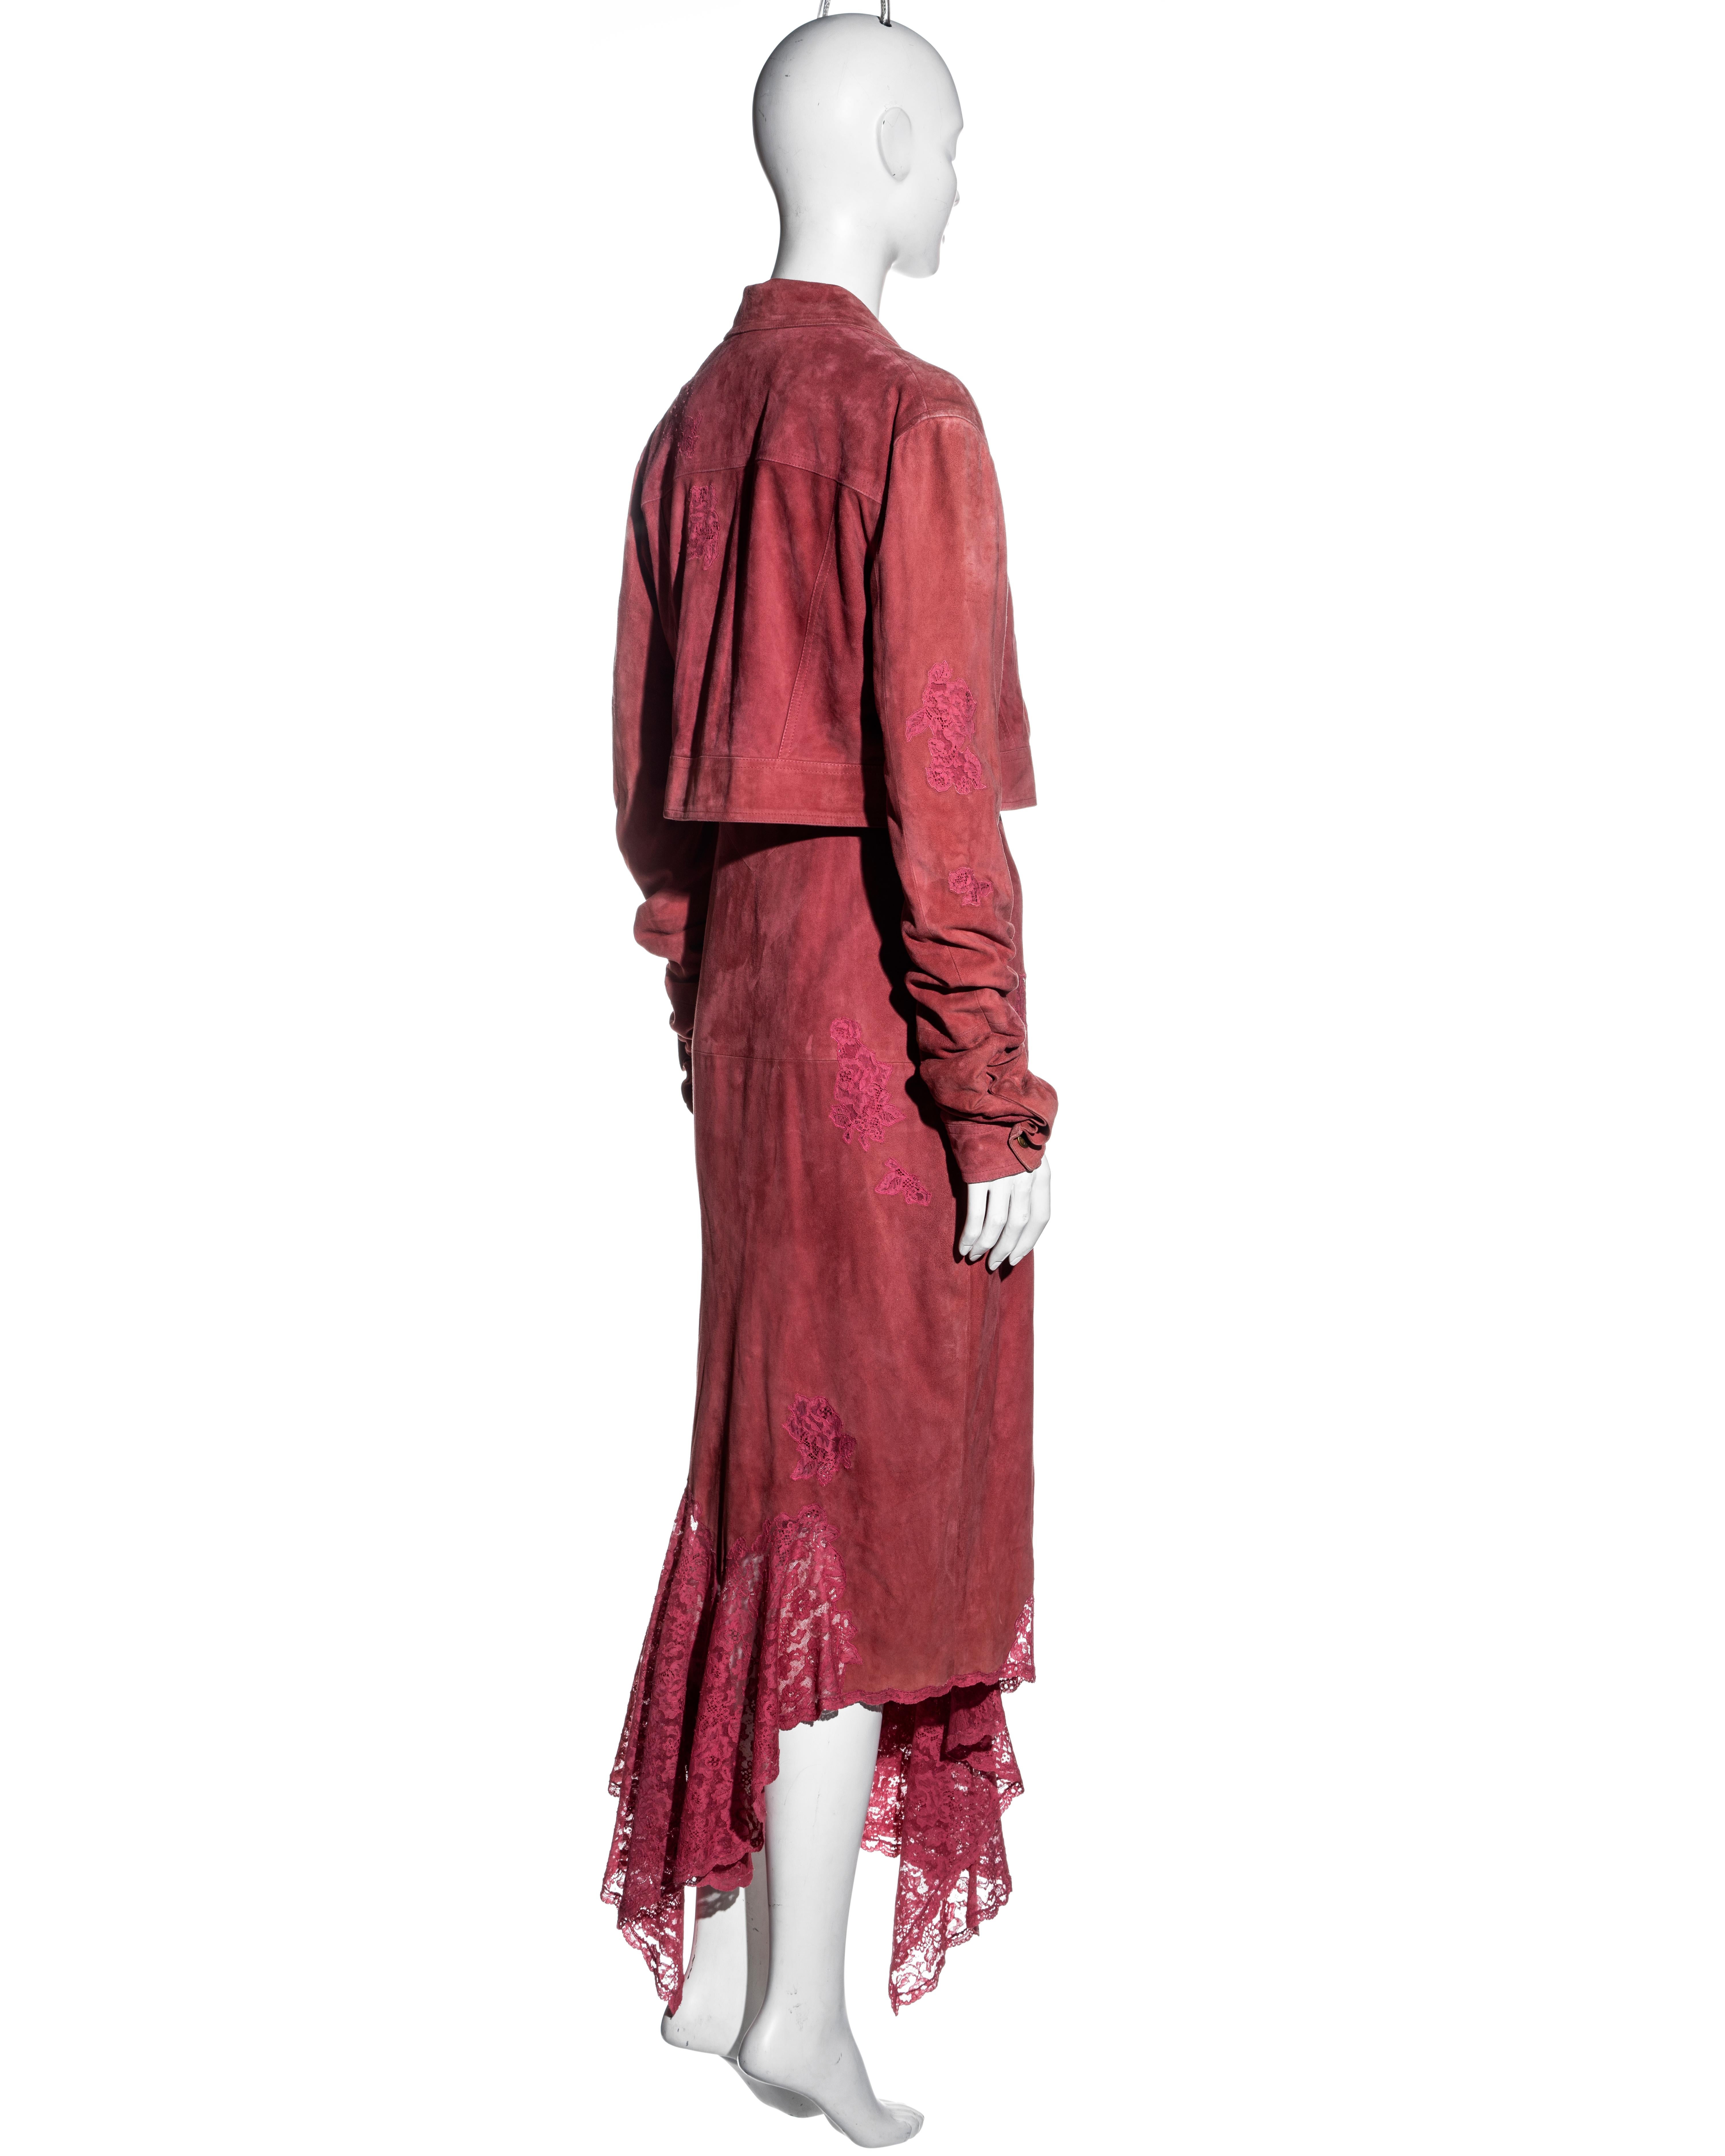 Christian Dior by John Galliano pink suede and lace dress and jacket, fw 2000 For Sale 3